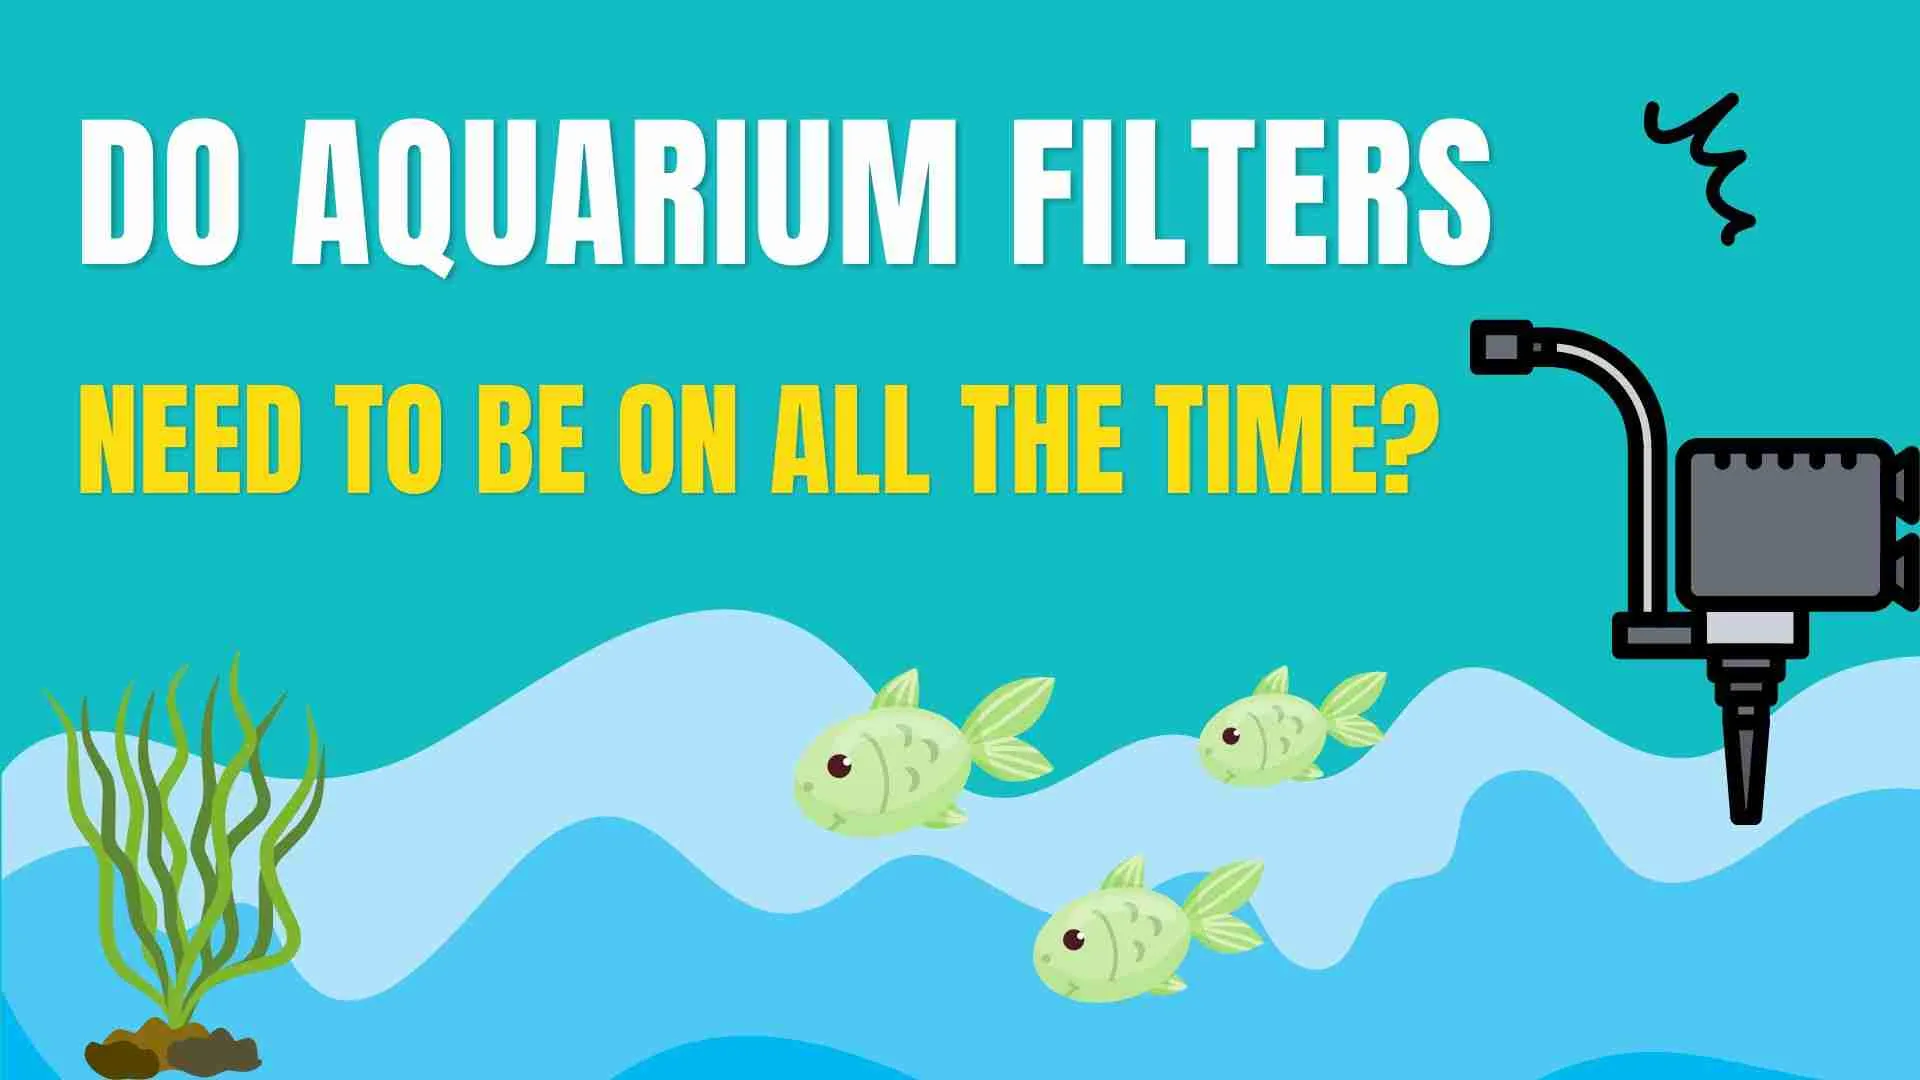 Do Aquarium Filters Need to be on all the time